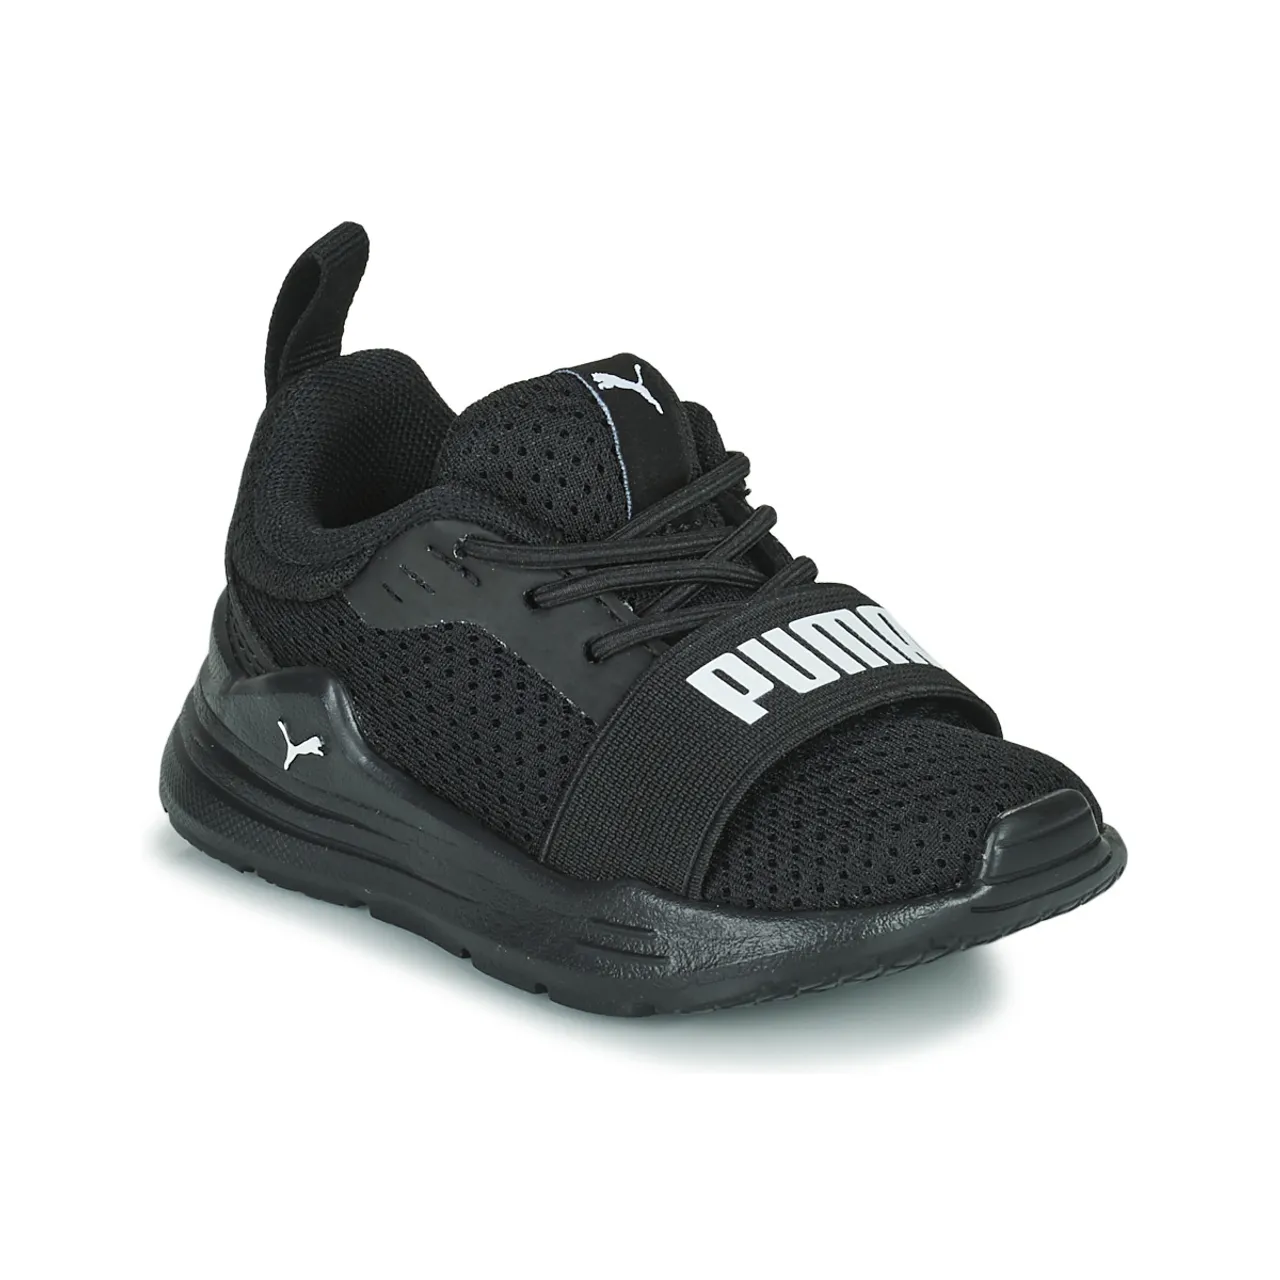 Puma  Wired Run AC Inf  boys's Children's Shoes (Trainers) in Black